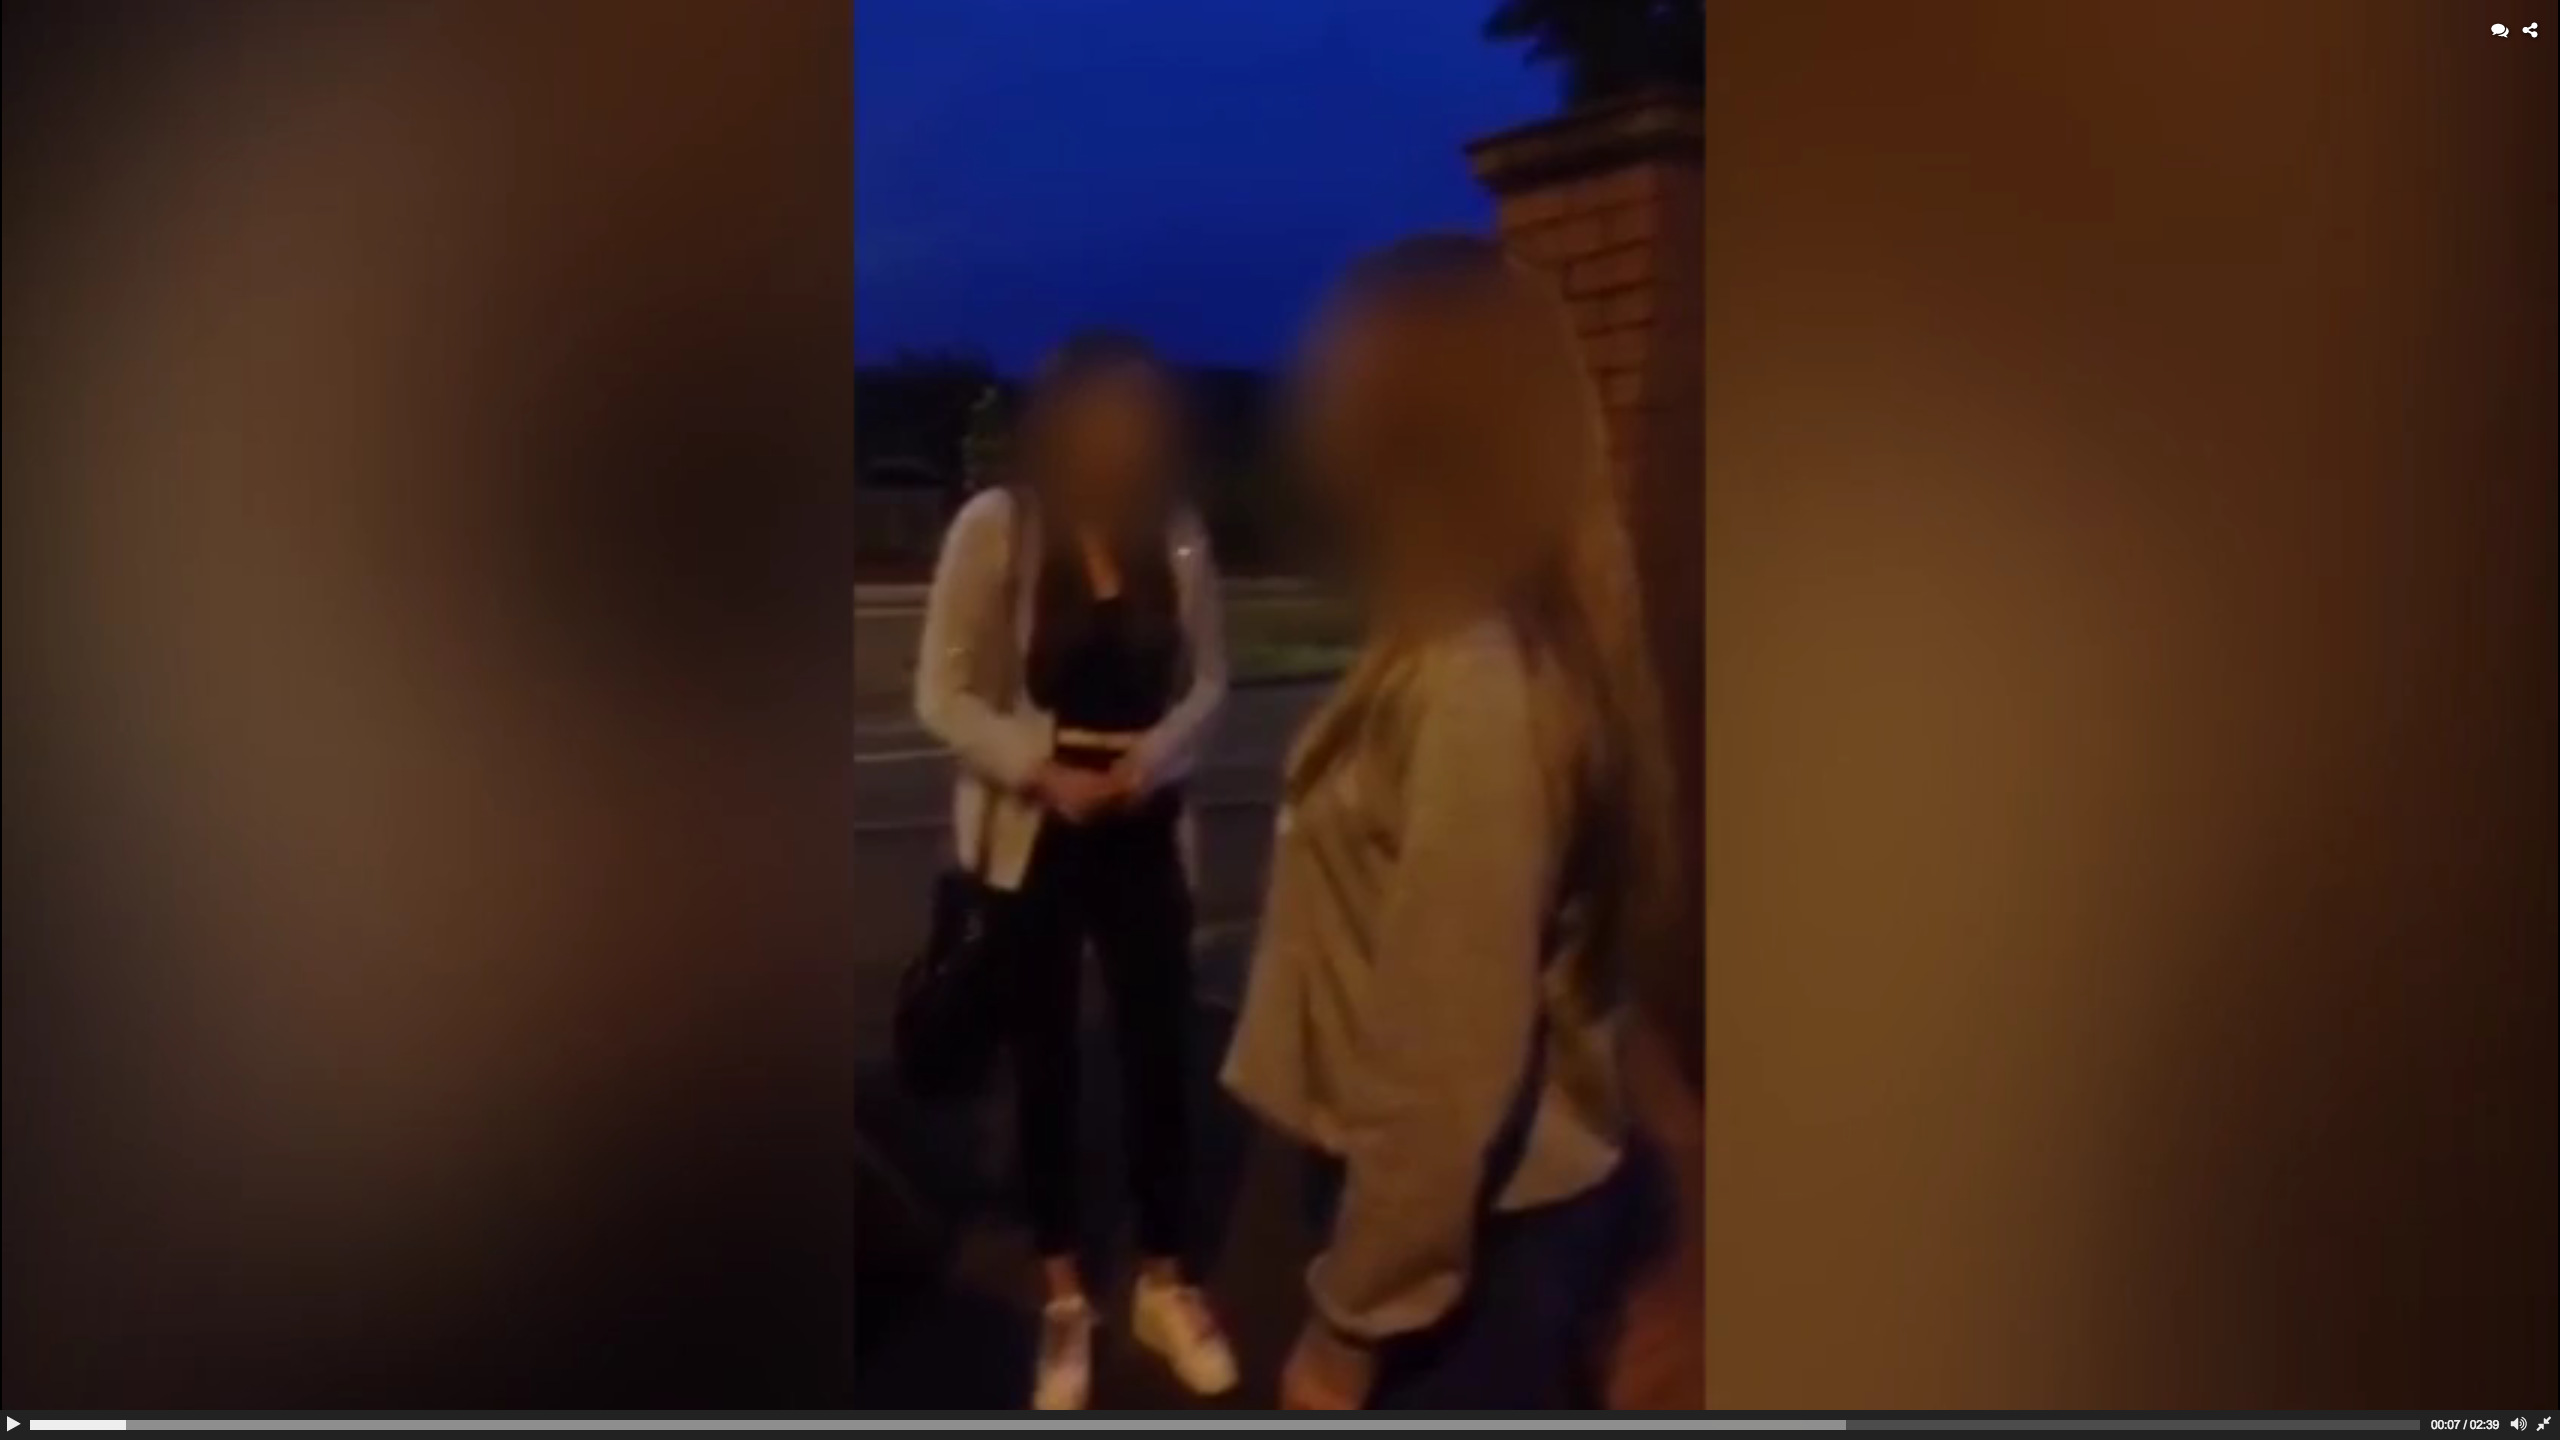 The video of her bullying the two younger girls went viral and was viewed millions of times